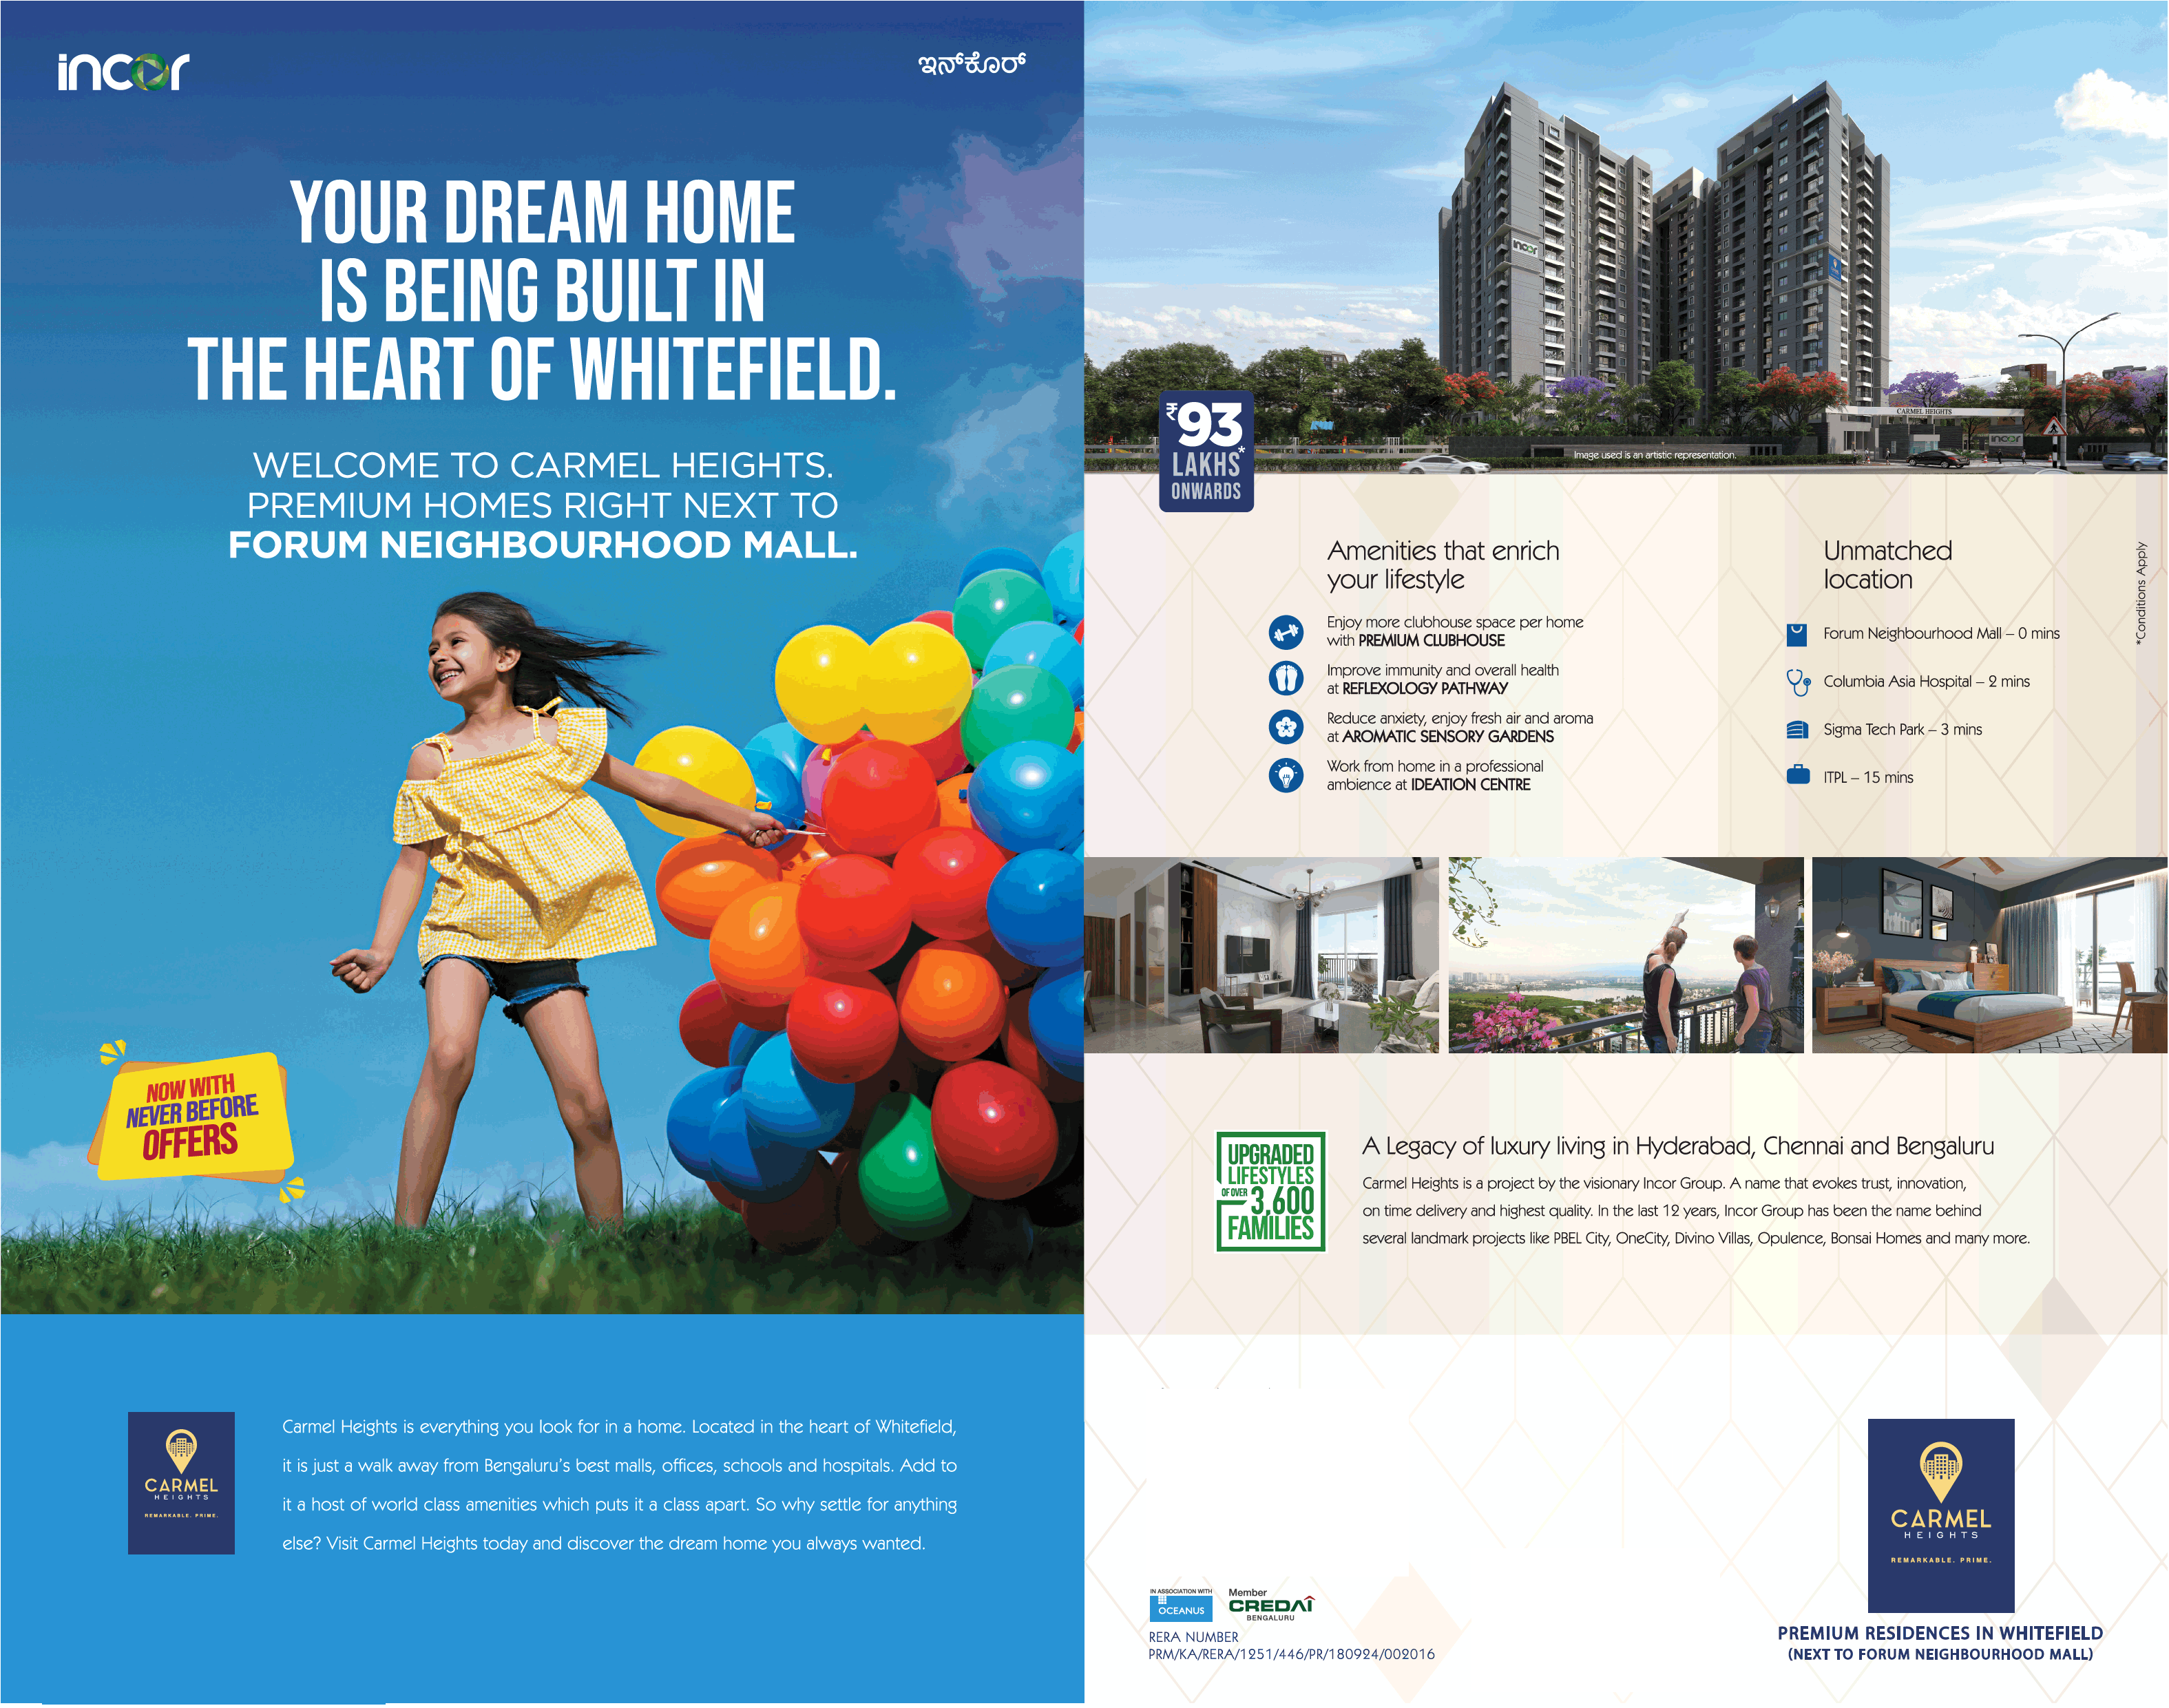 Book apartment start at Rs 93 lakh onwards at Incor Carmel Heights, Whitefield Bangalore